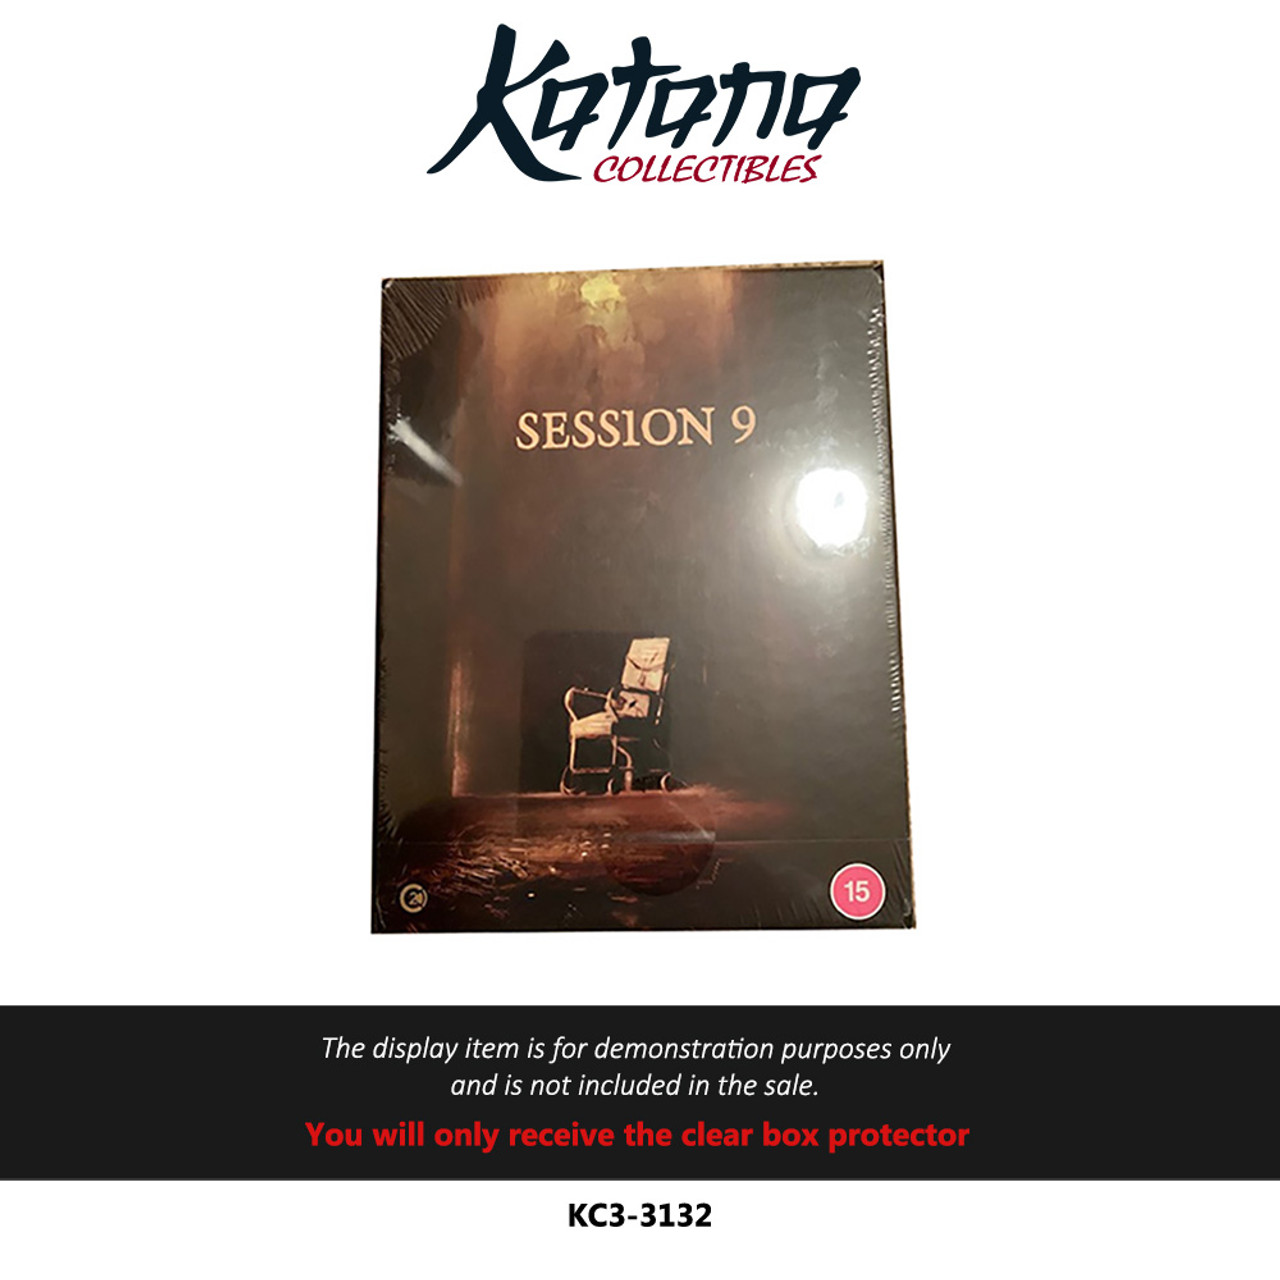 Katana Collectibles Protector For Session 9